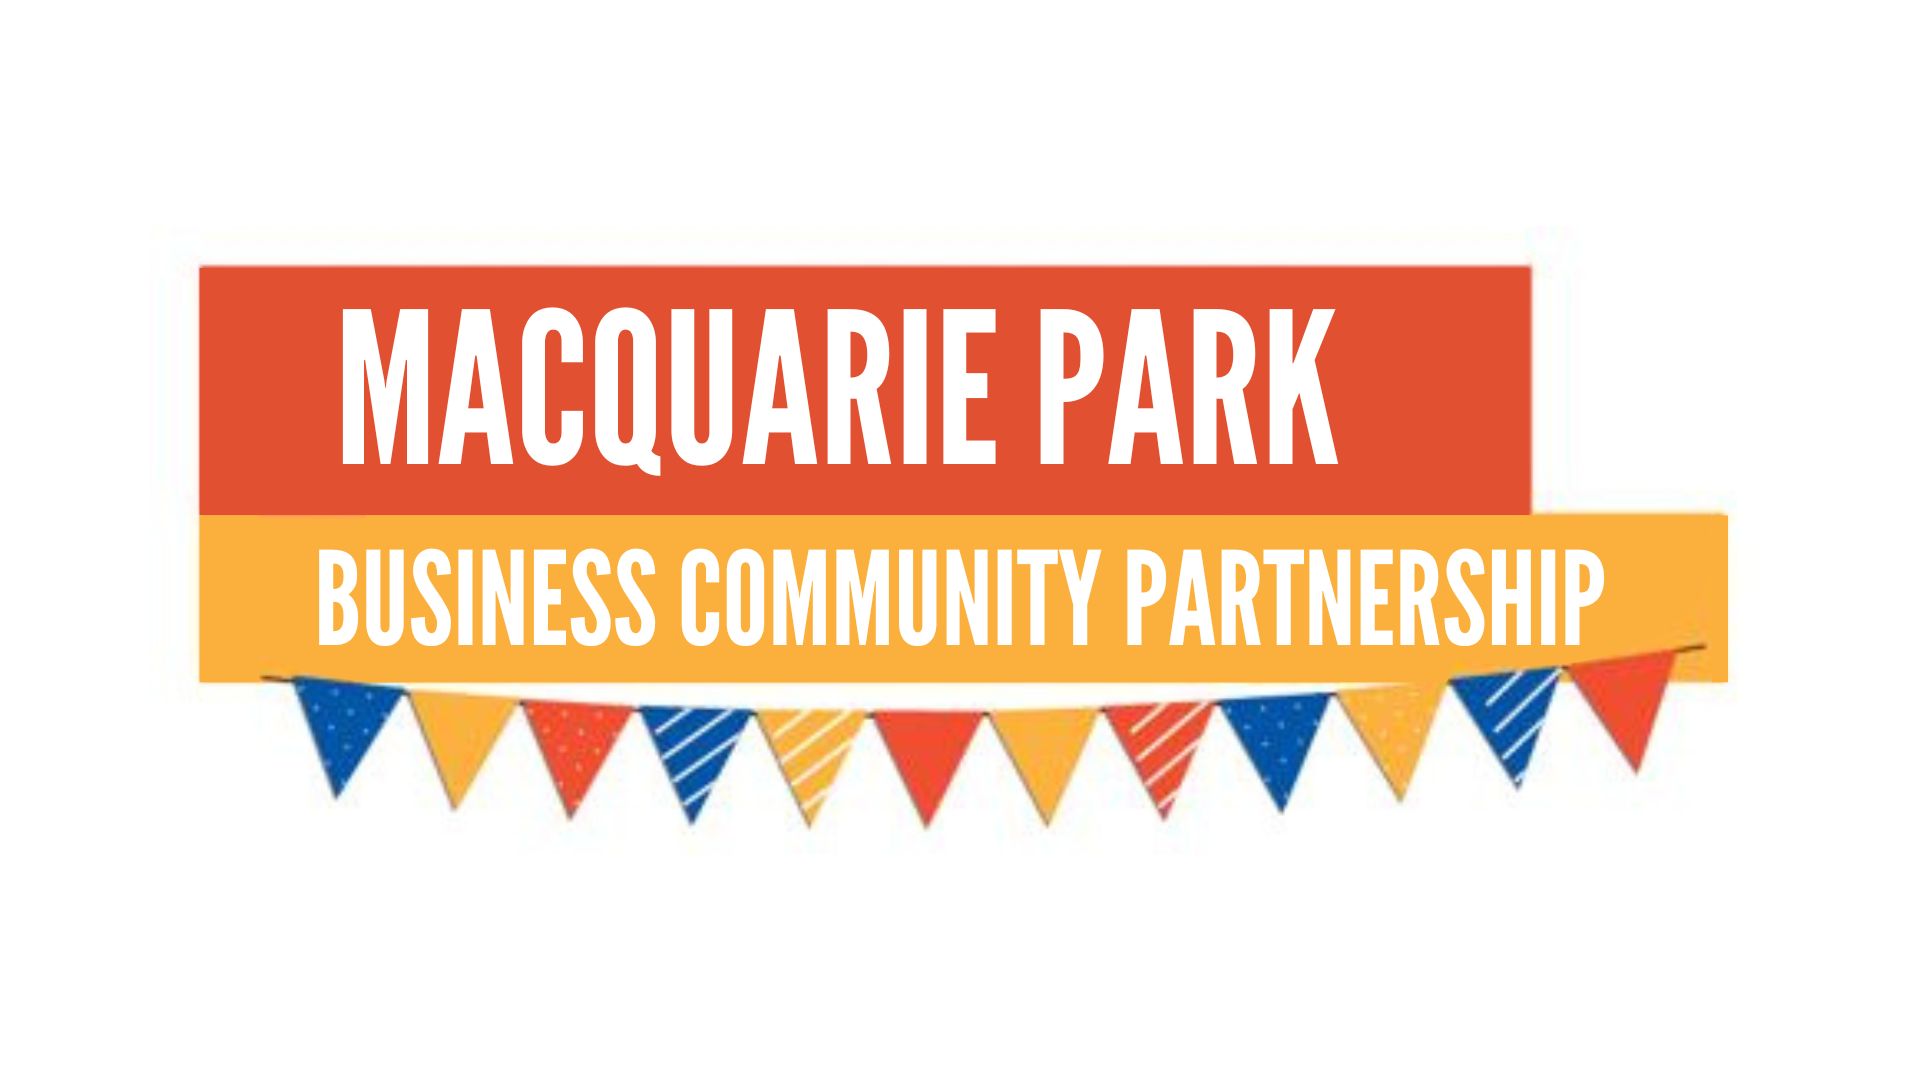 Colourful bunting beneath a red and orange coloured banner of the words: Macquarie Park Business Community Partnership